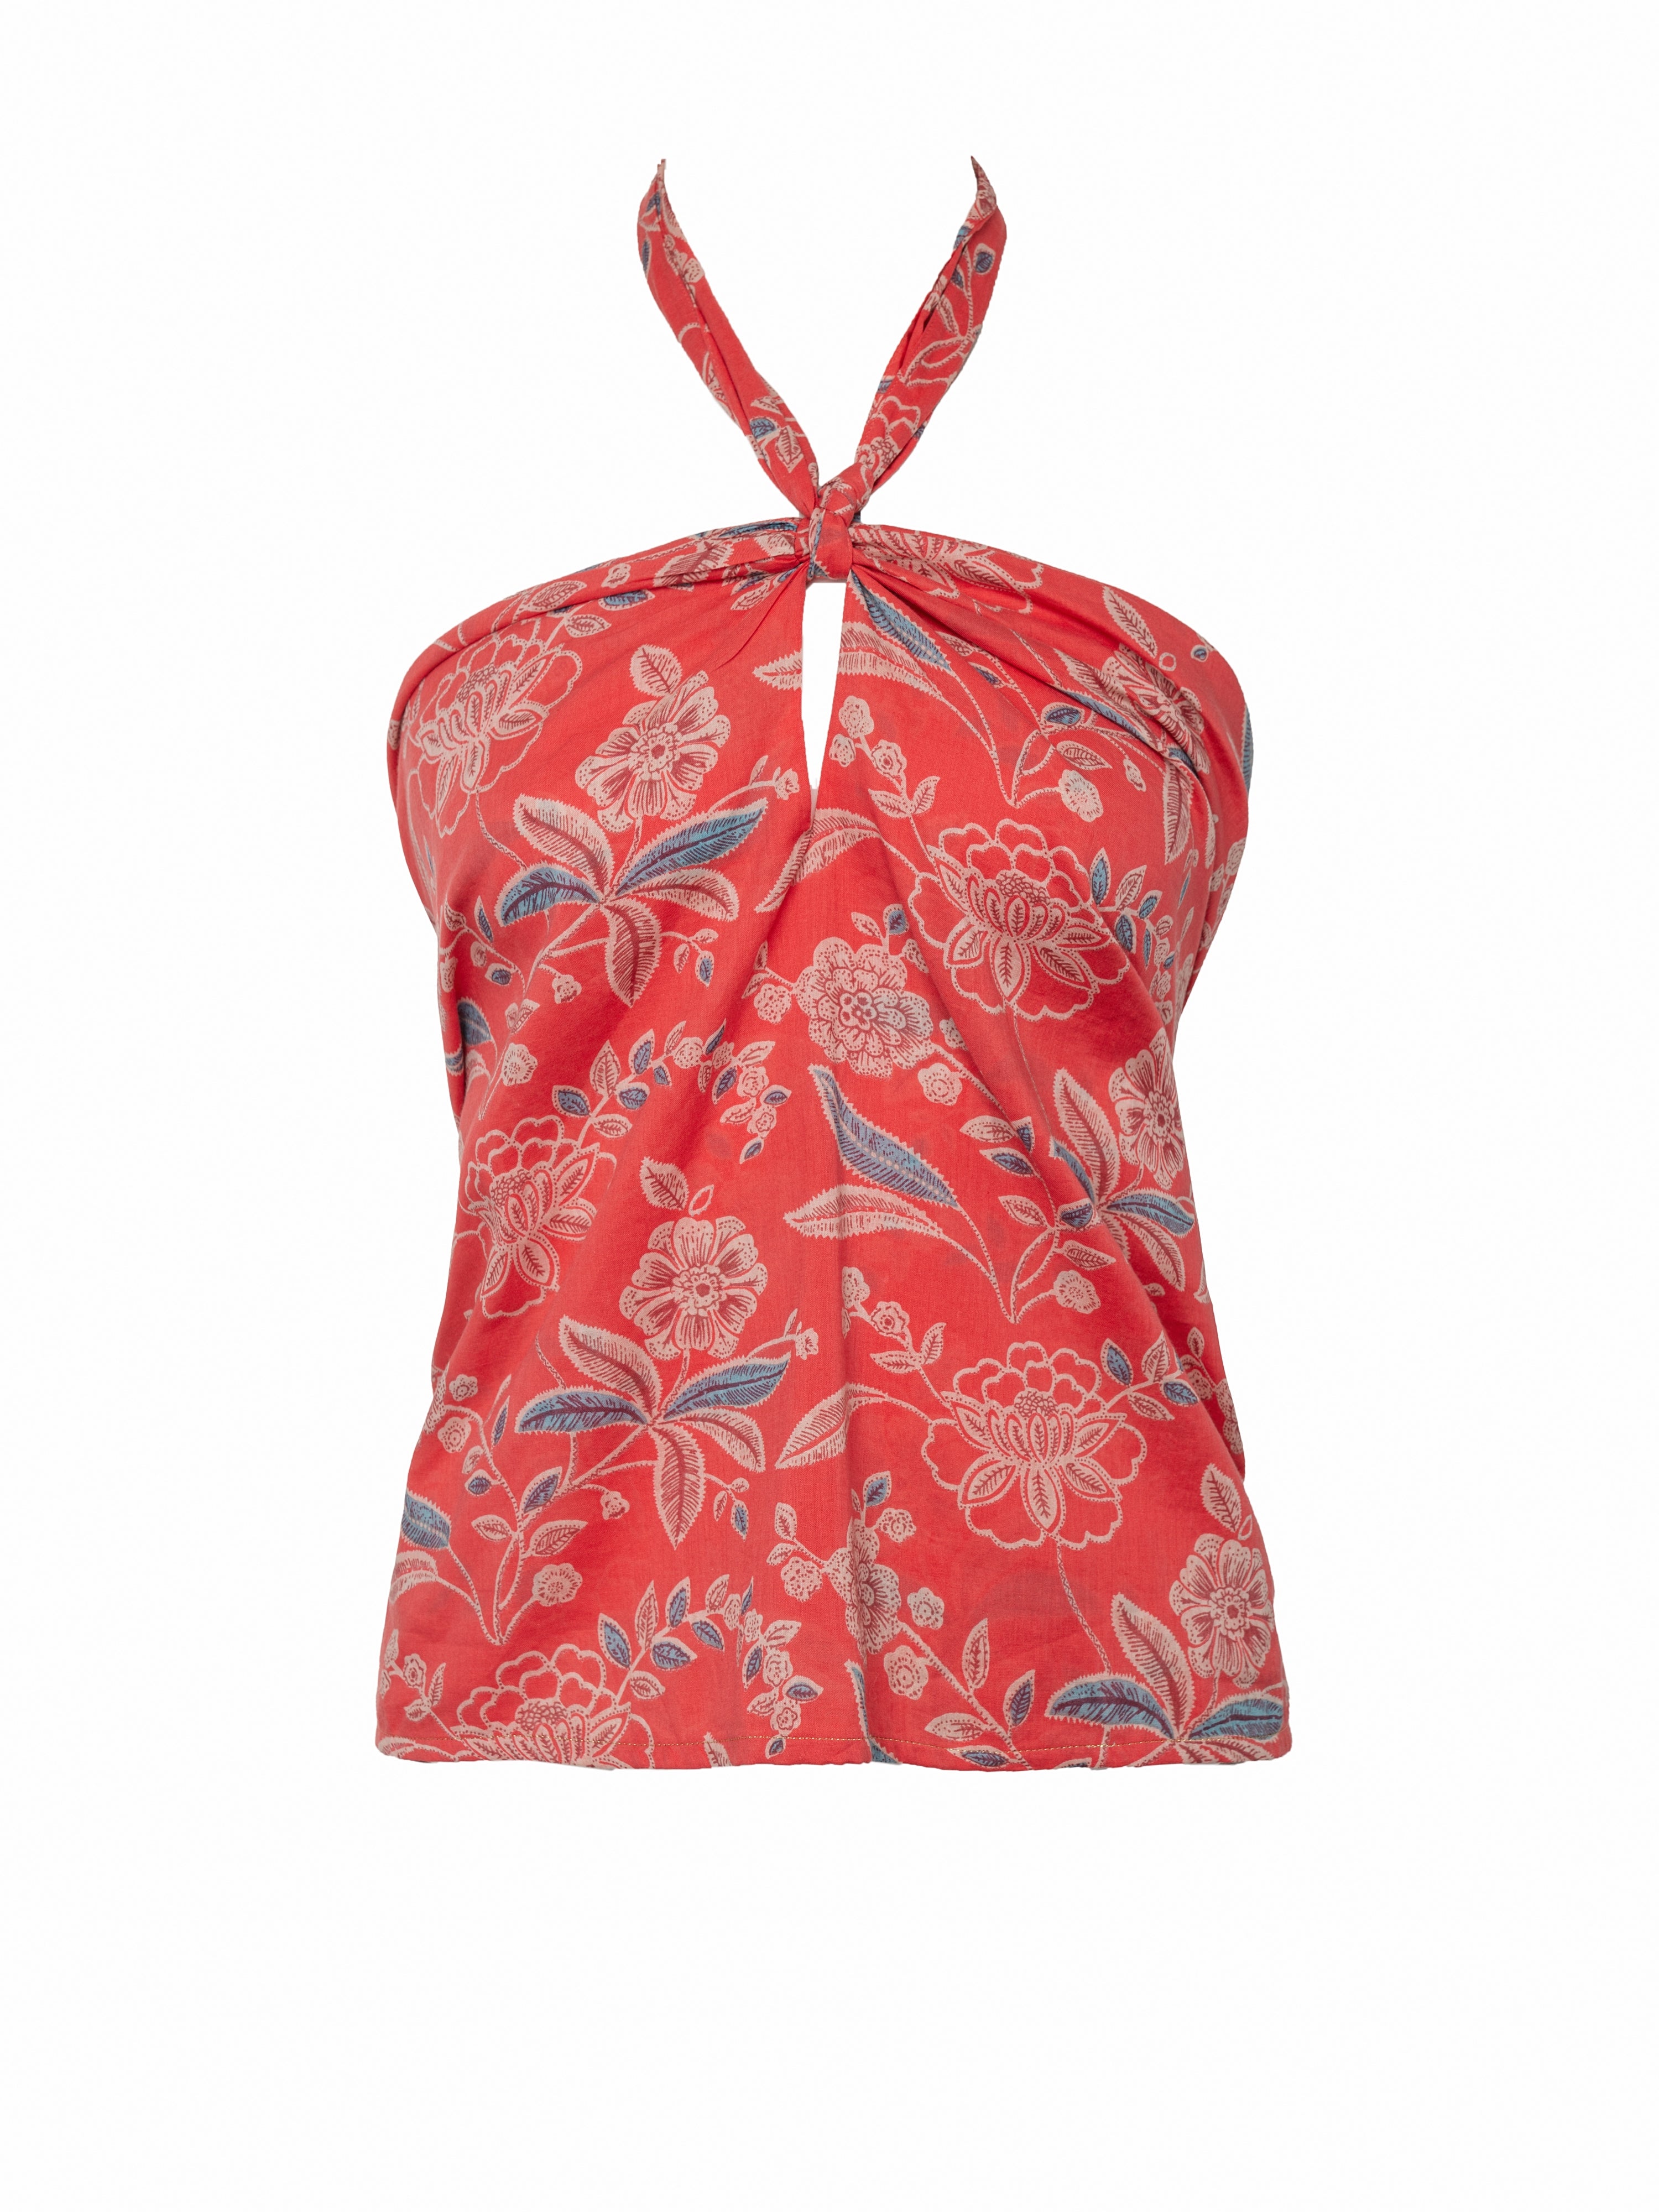 Mai Halter Top - Red Floral by Desert Queen